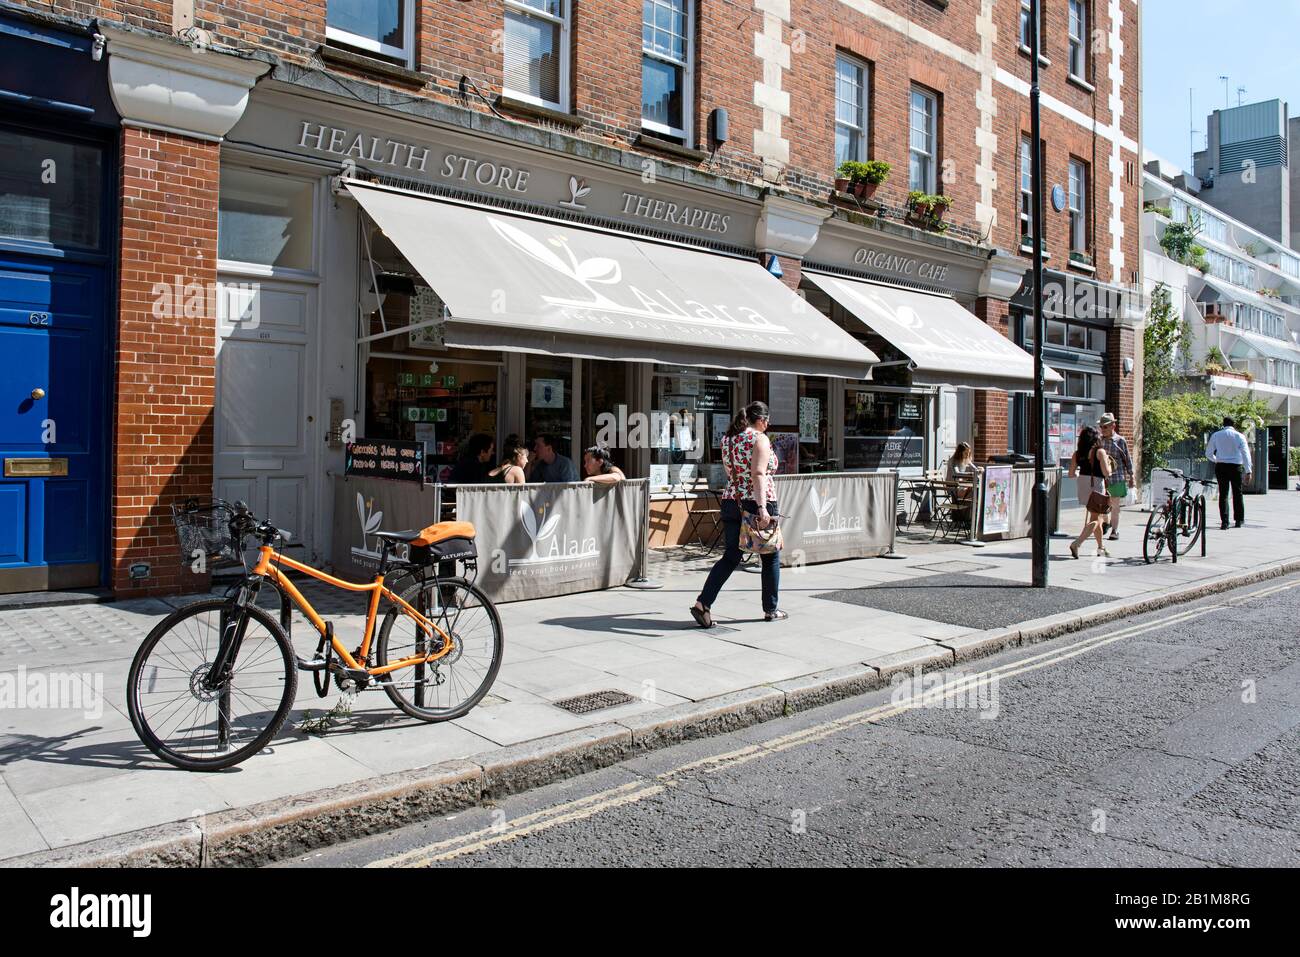 Alara Health Store and Organic Cafe with people walking past, Marchmont Street, Bloomsbury, London Stock Photo